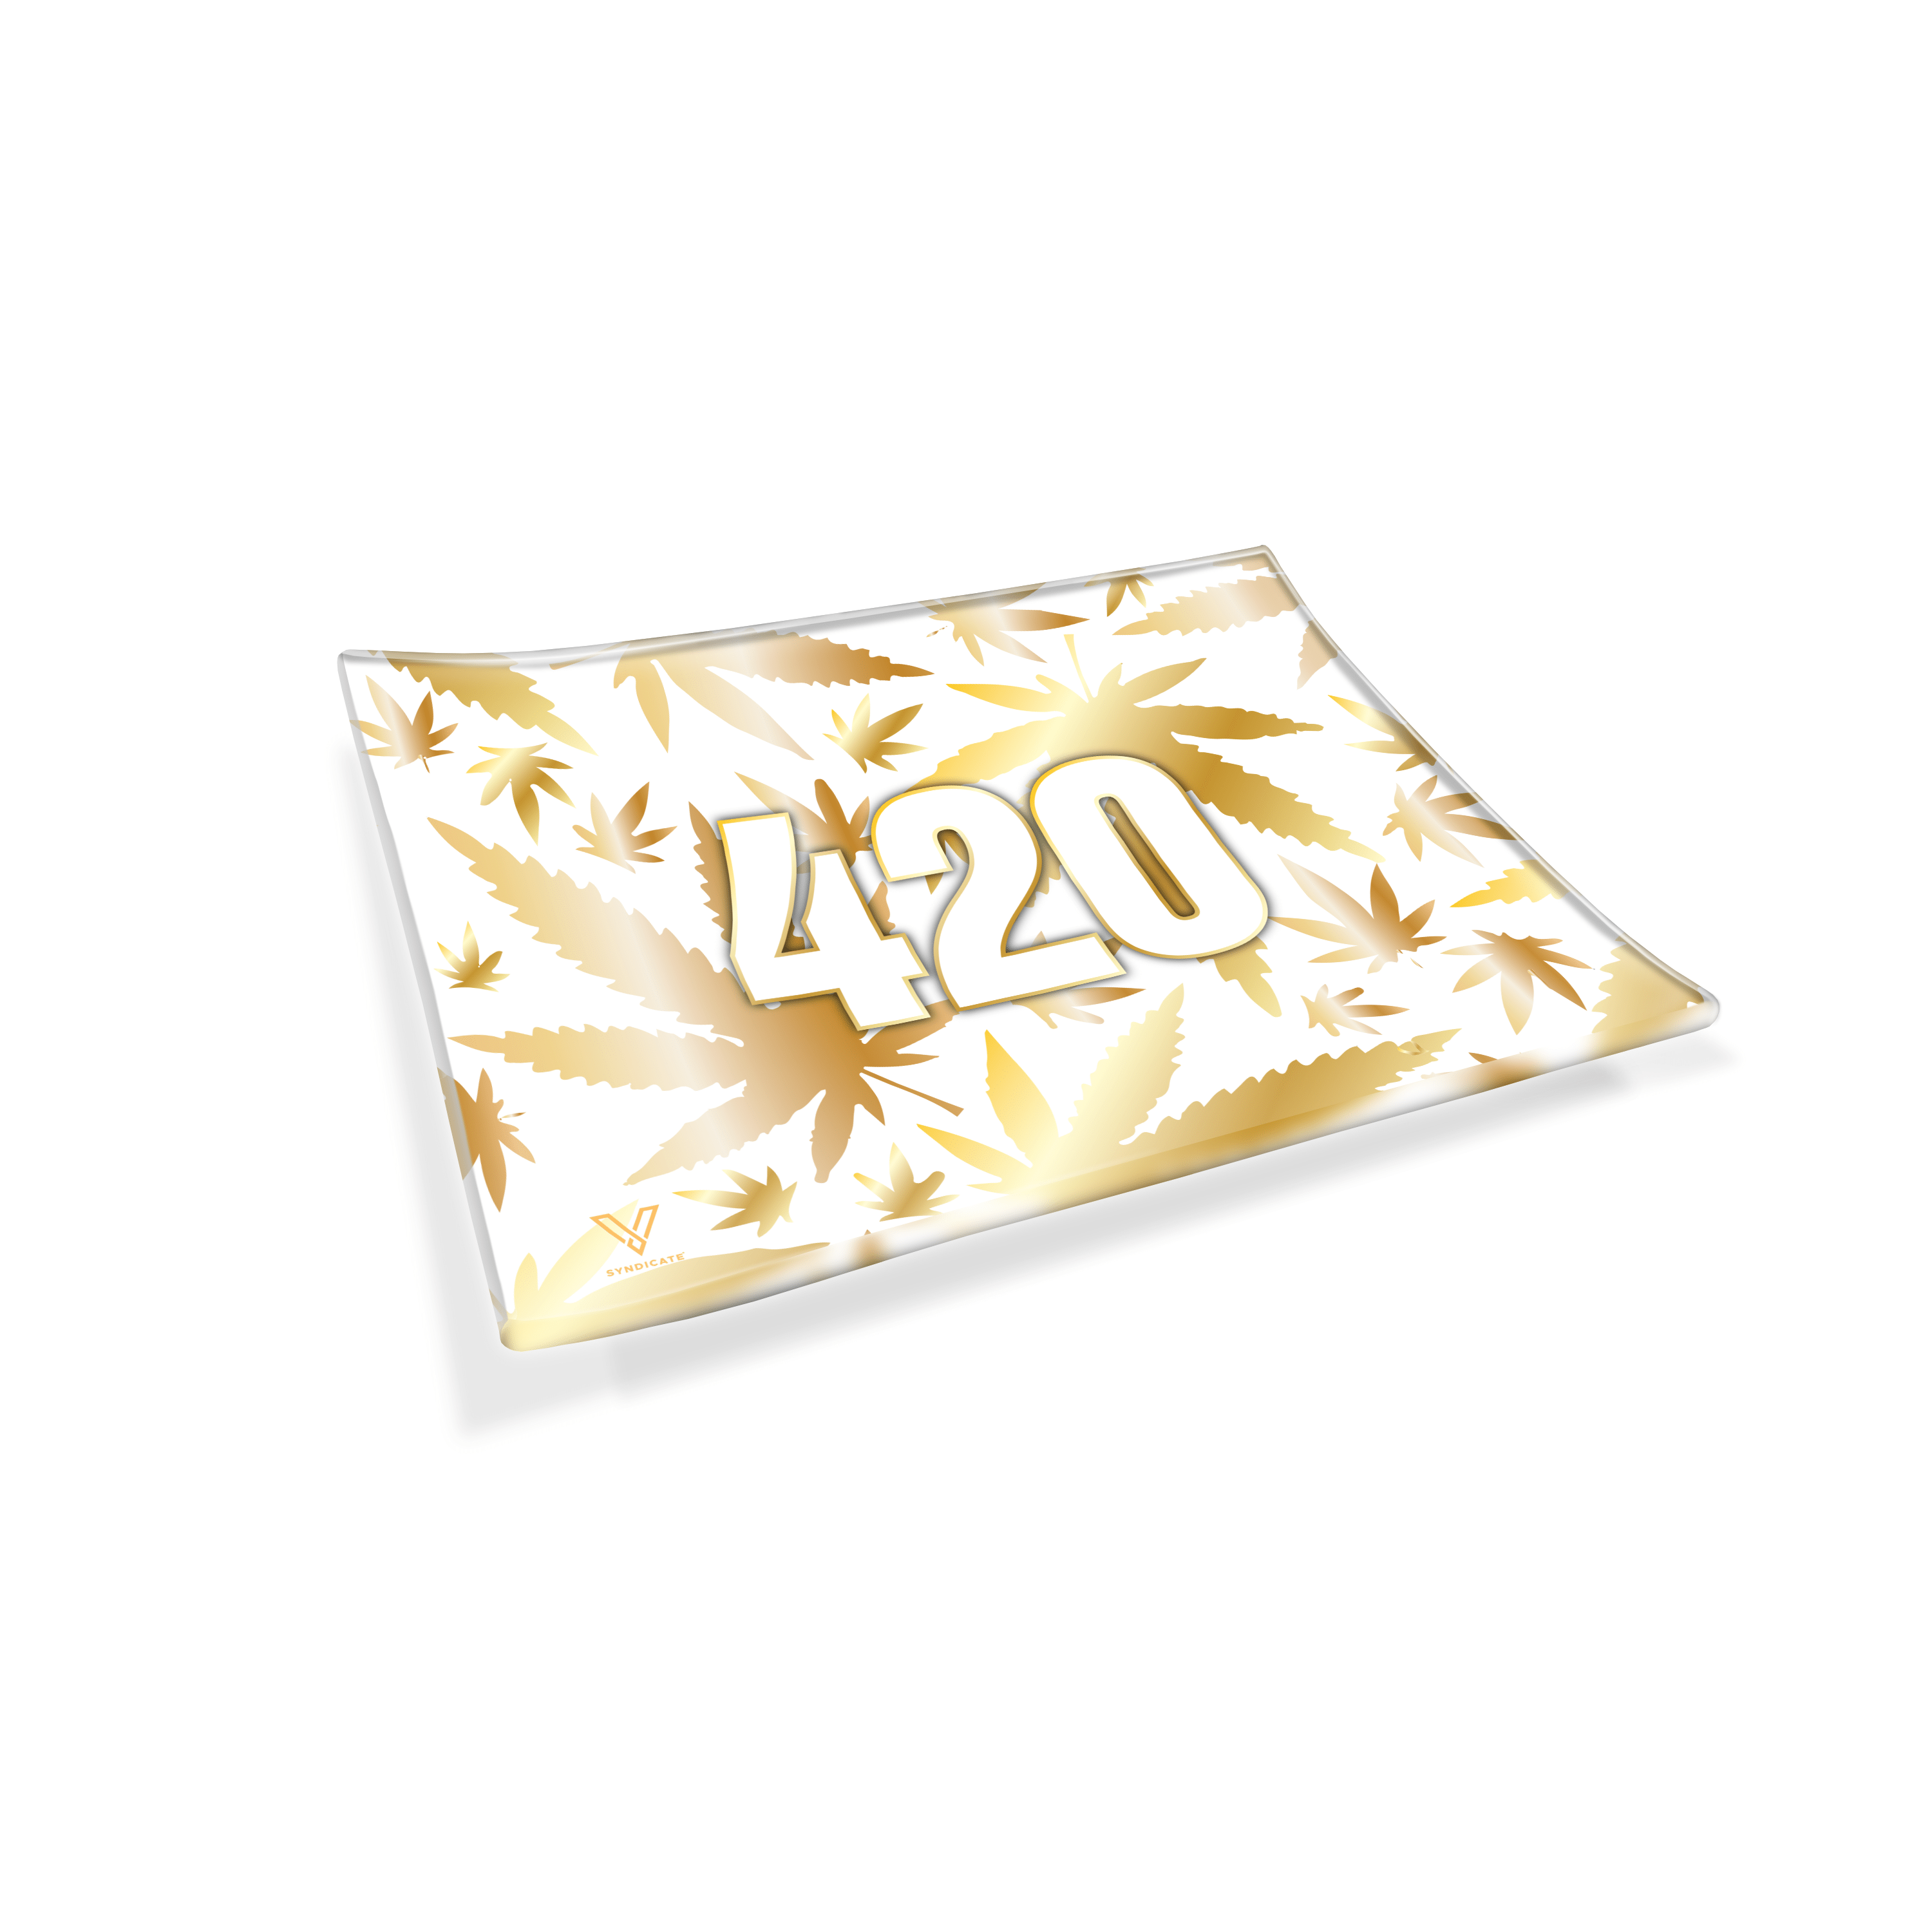 V Syndicate Glass Rollin' Tray 420 Gold Glass Rollin' Tray